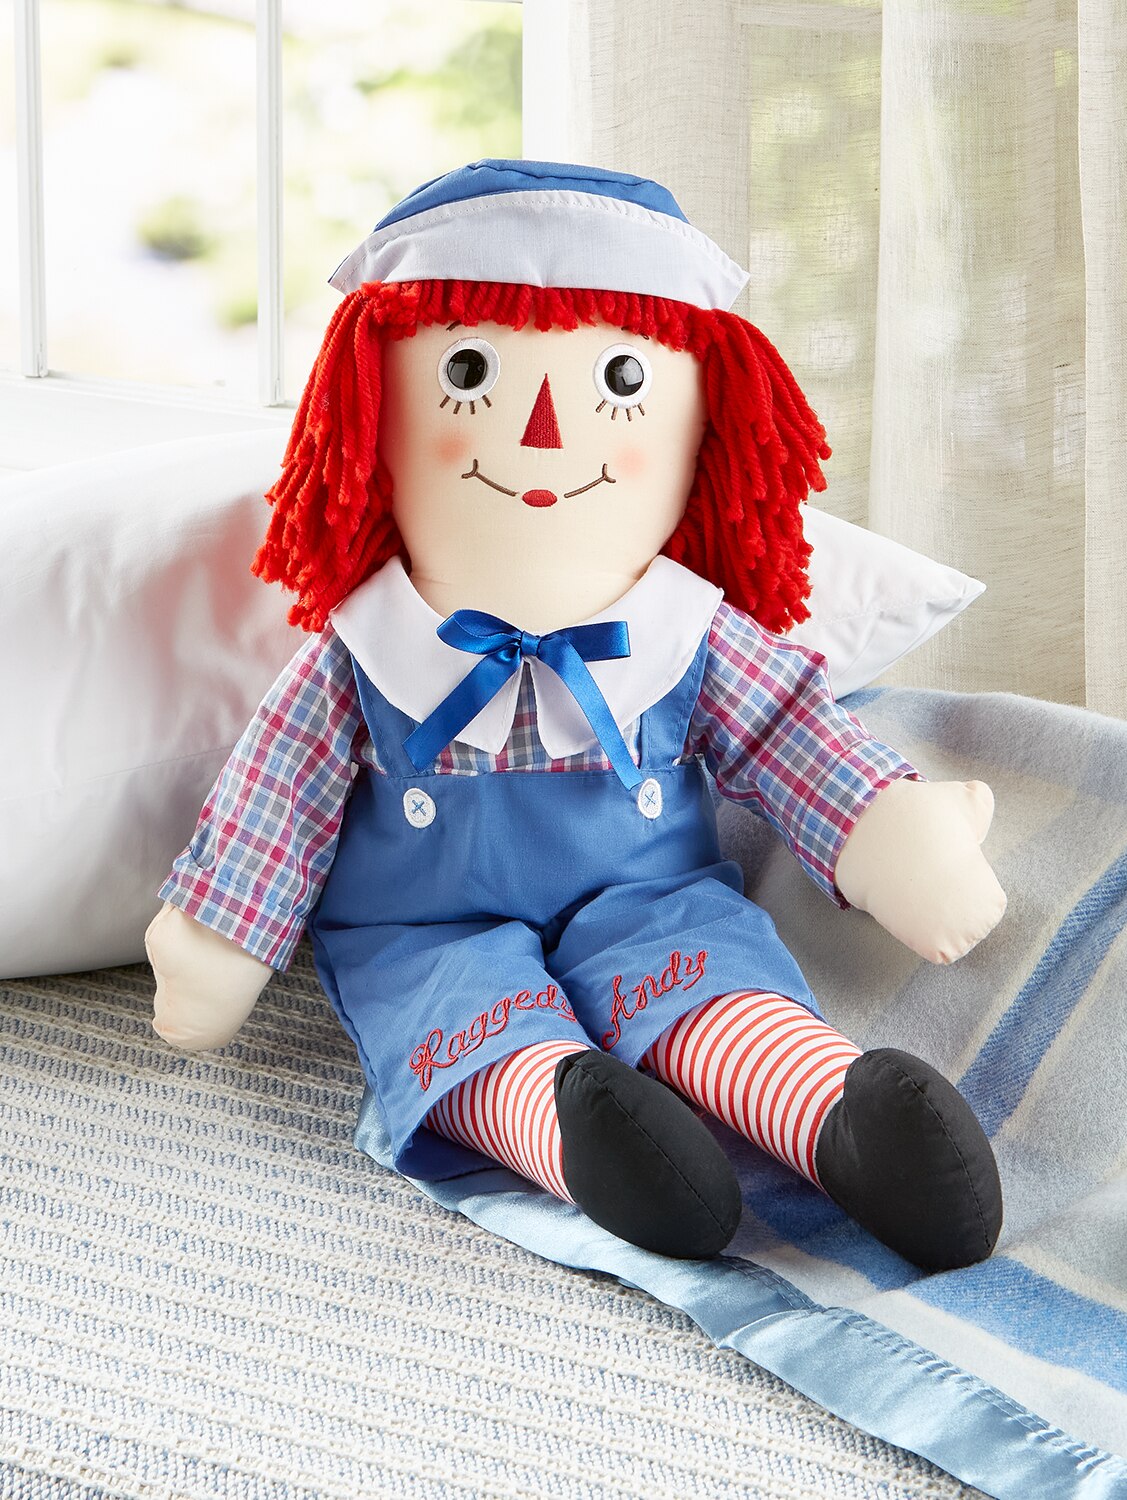 Tall Raggedy Ann and Andy dolls